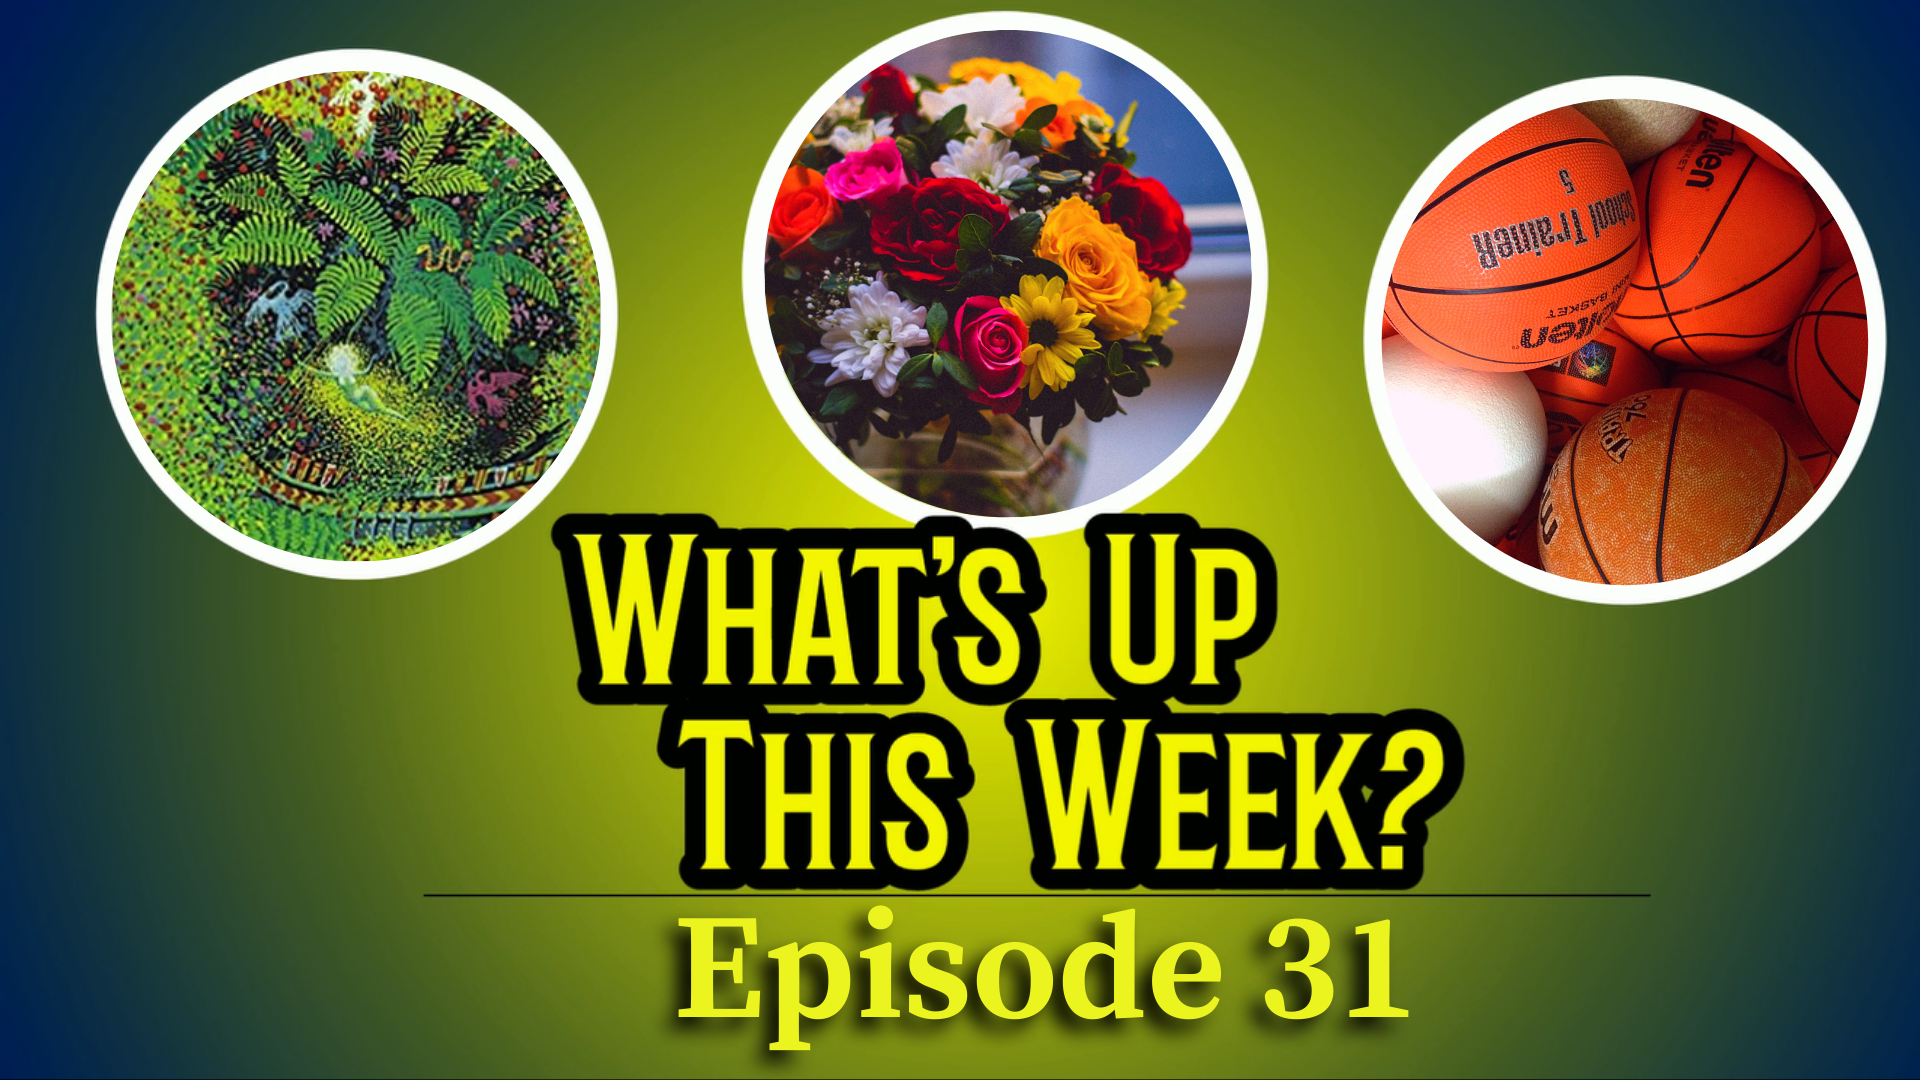 Text: What's Up This Week?, Episode 31.  3 circles contain images: the cover of a Garcia Marquez book, a bouquet of flowers, and several basketballs.